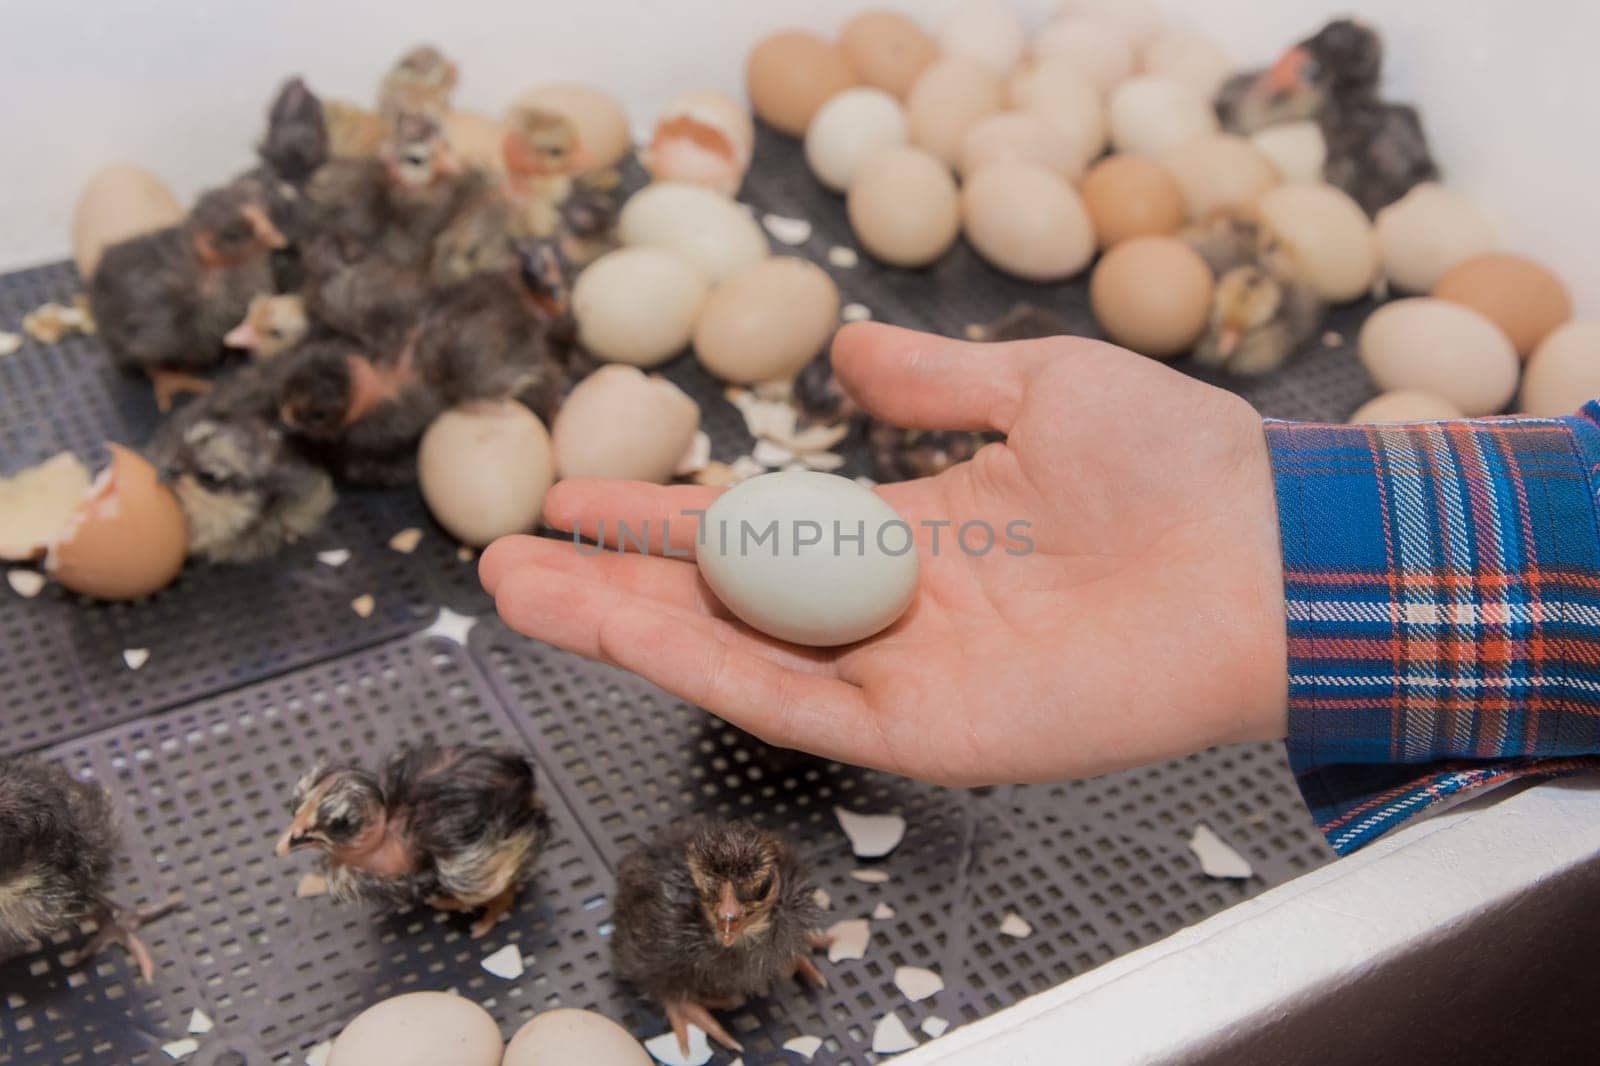 Farmer's hand close-up holding hatching chicken small egg against background of chickens in incubator, poultry farming.